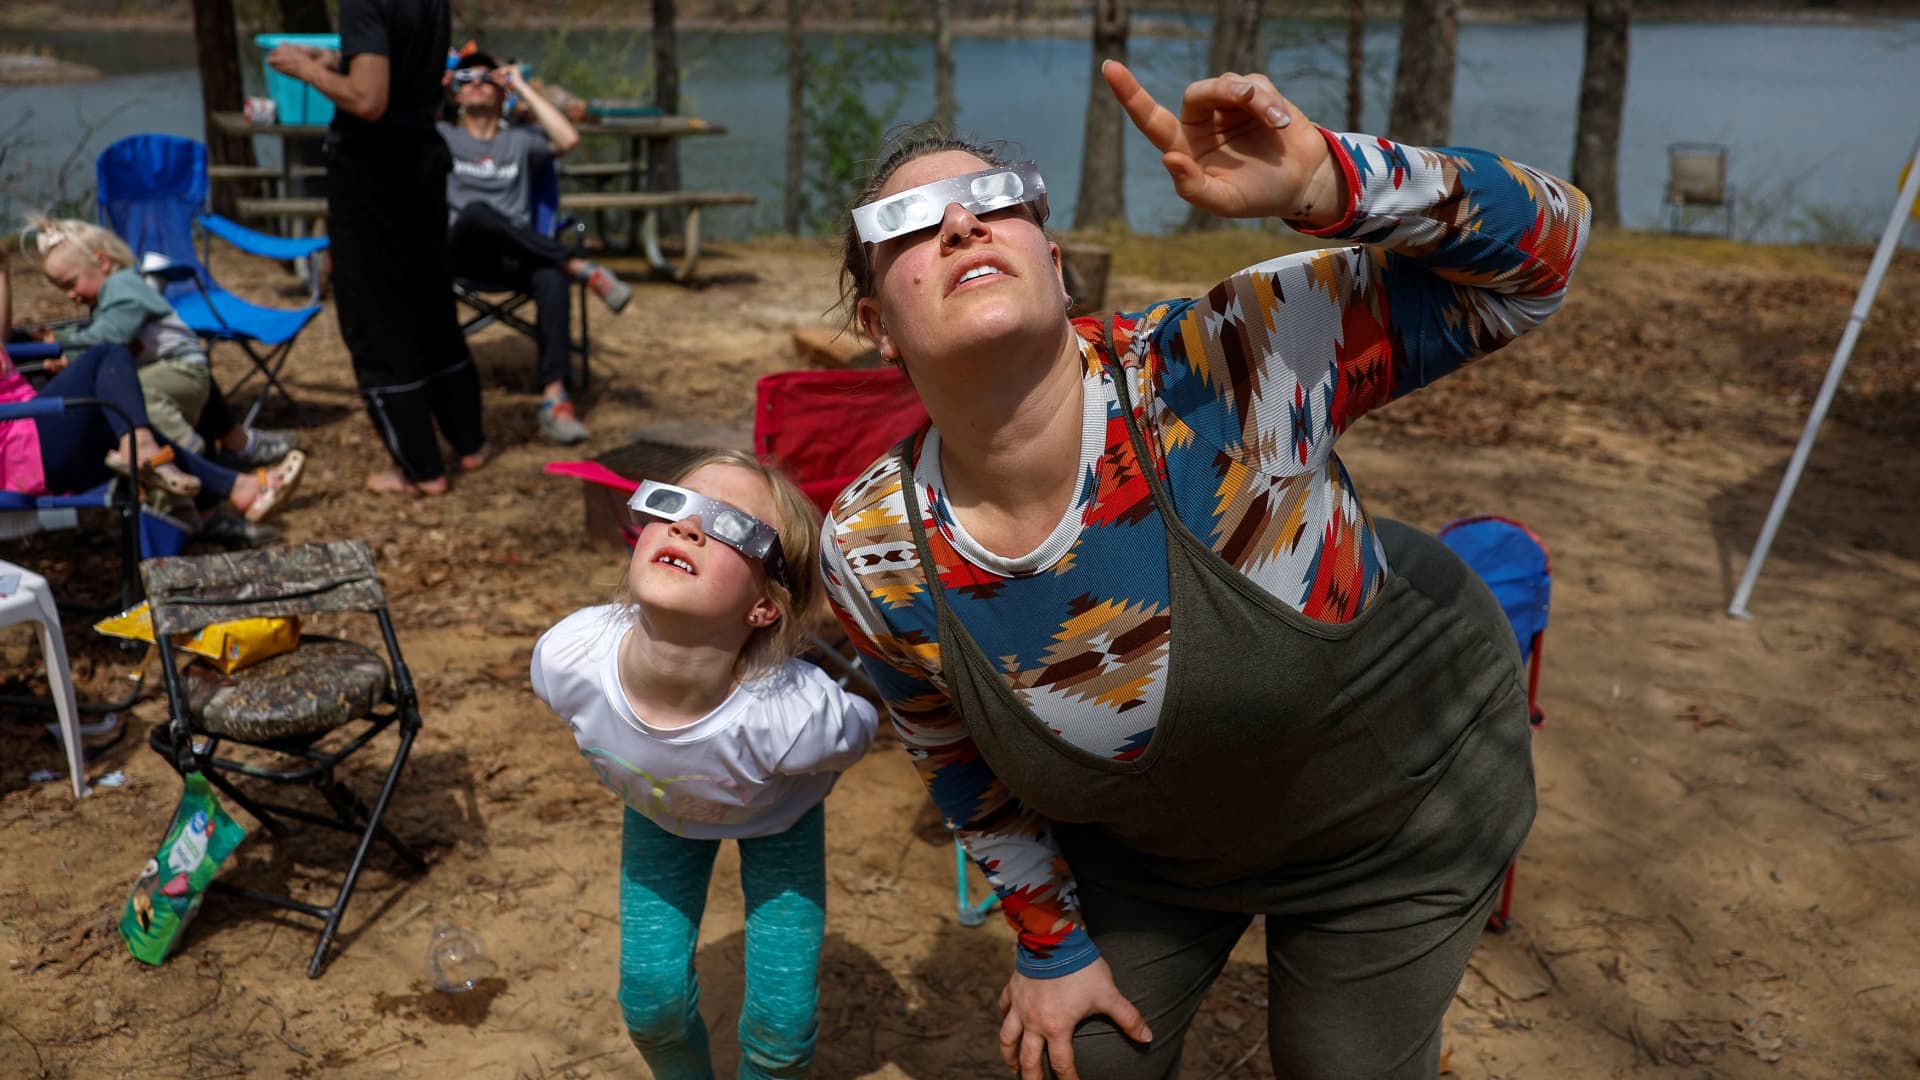 Brittany Sunderman and Gianna Debenham, 6, from Effingham, Illinois, and other members of the Debenham family who travelled from Utah and Las Vegas to experience the total solar eclipse together, try out their eclipse viewing glasses at their campsite a day ahead of the event at Camp Carew in Makanda, Illinois, U.S., April 7, 2024.